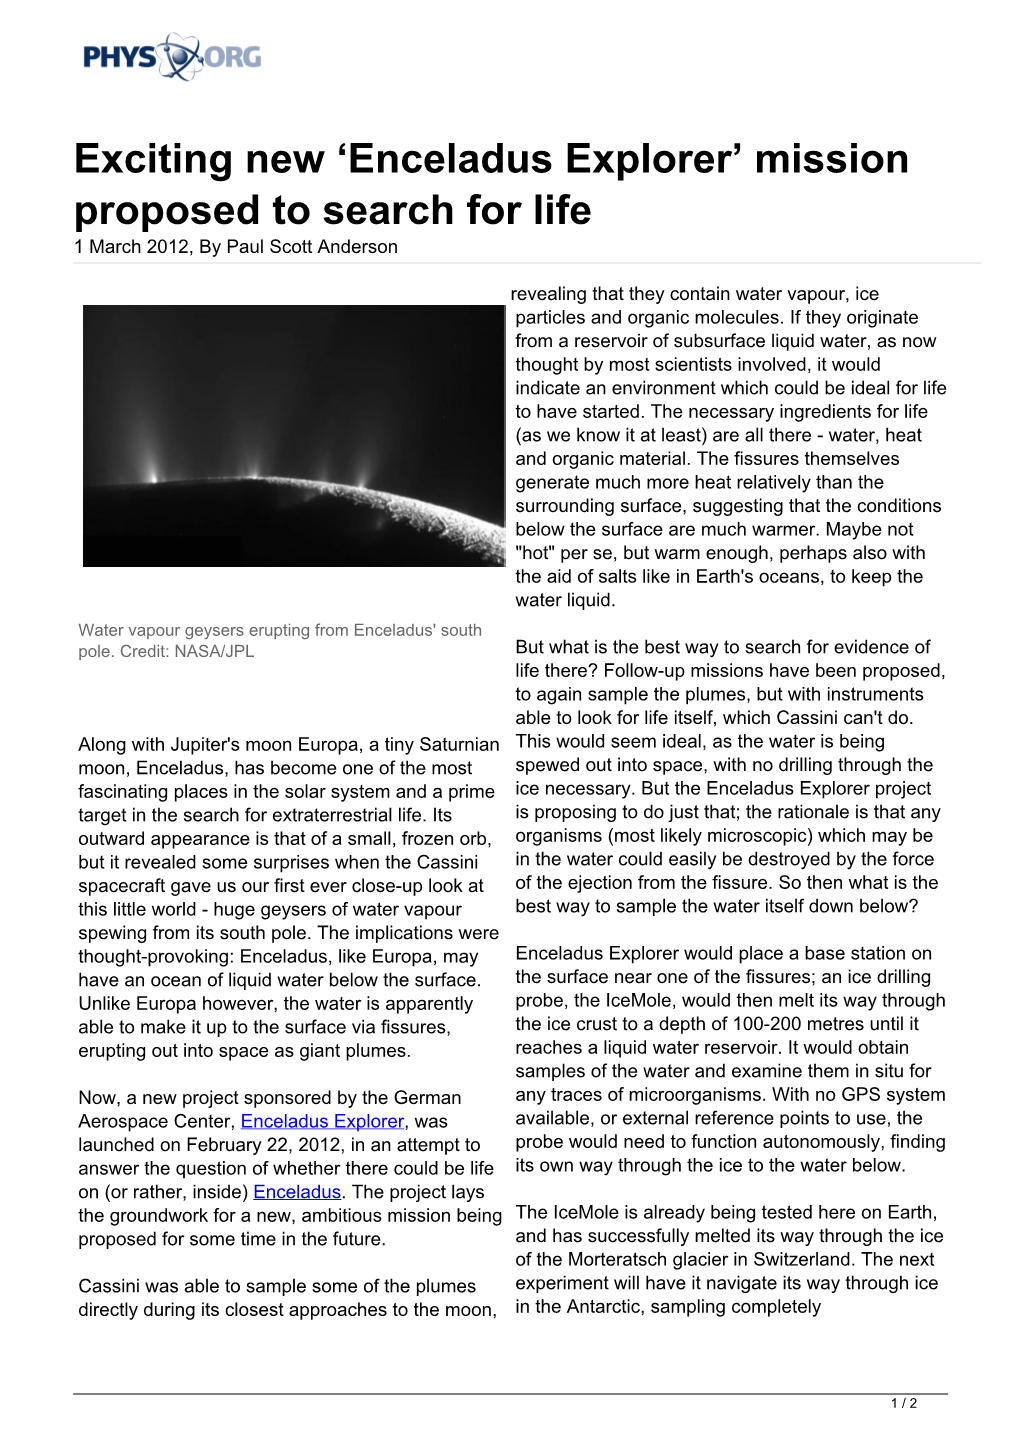 Exciting New 'Enceladus Explorer' Mission Proposed to Search for Life